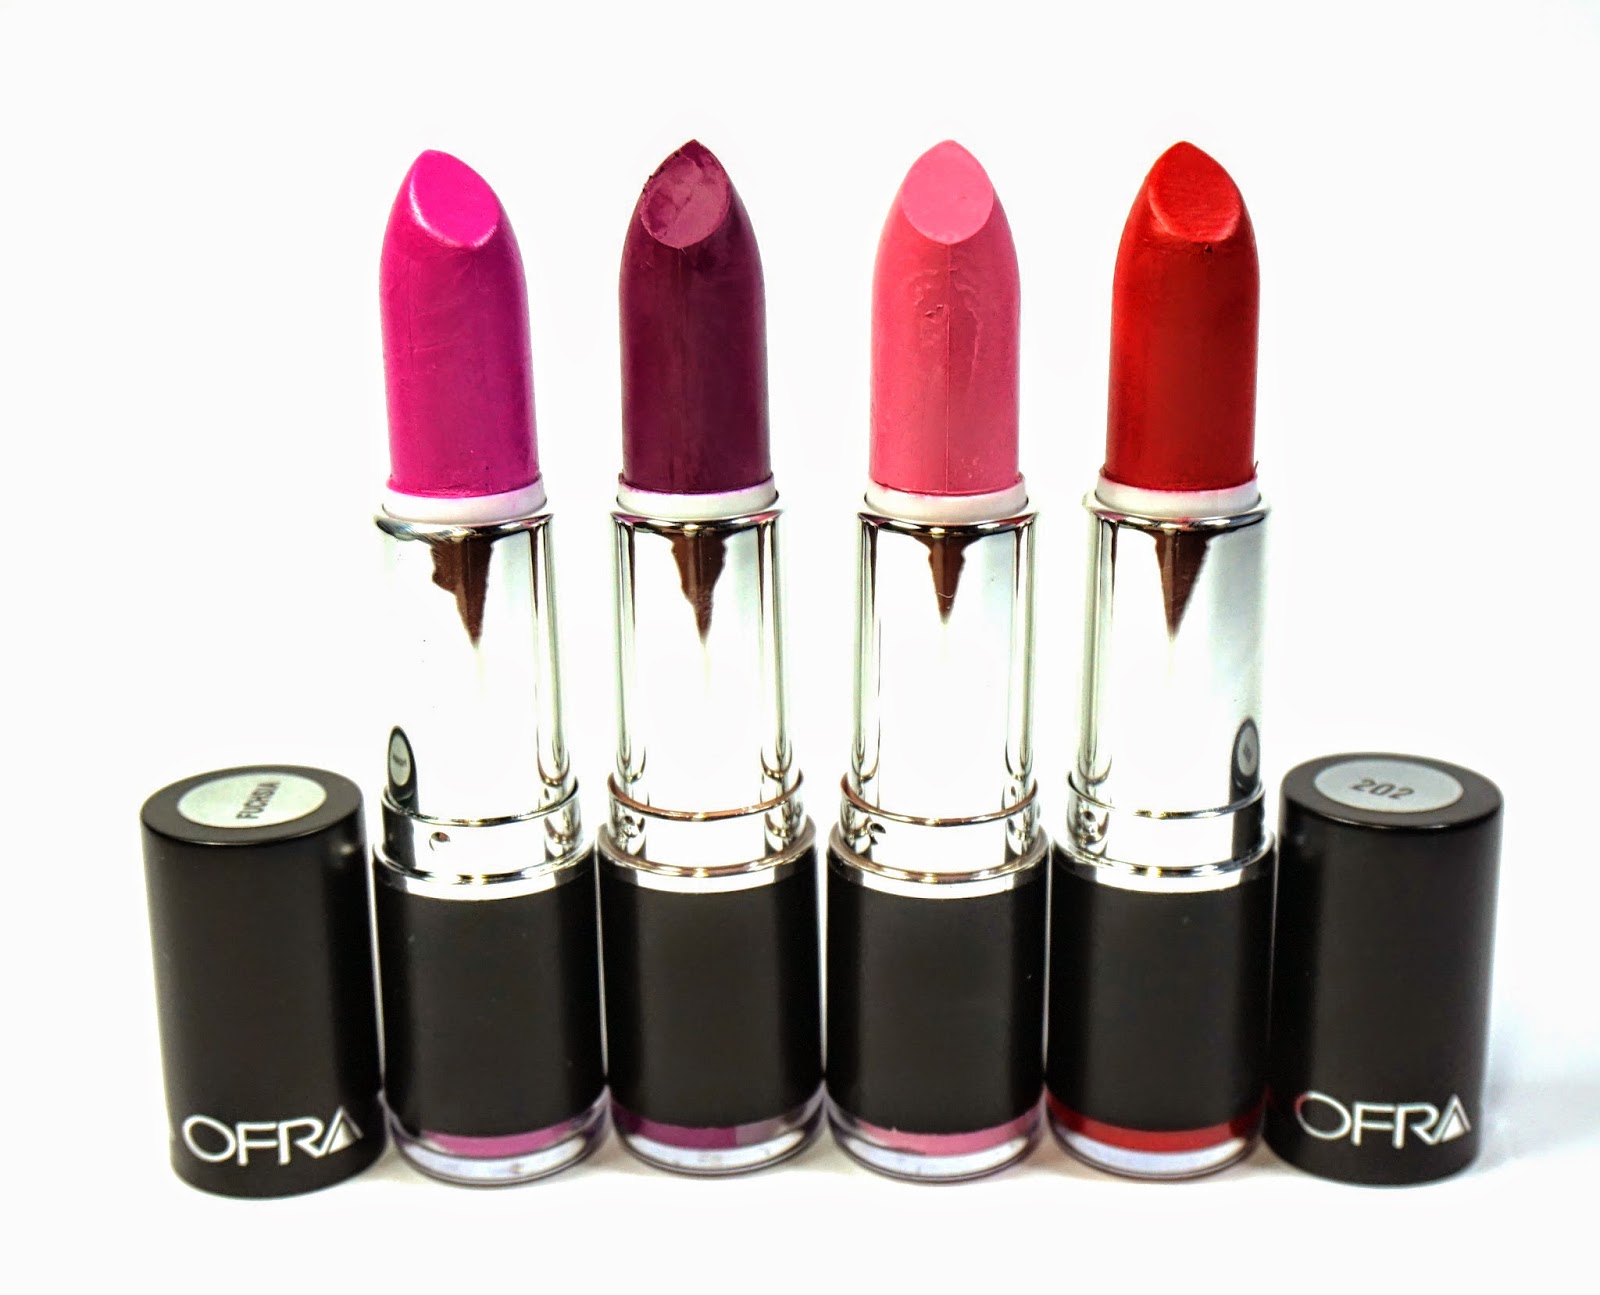 Ofra Lipsticks Review + Swatches.